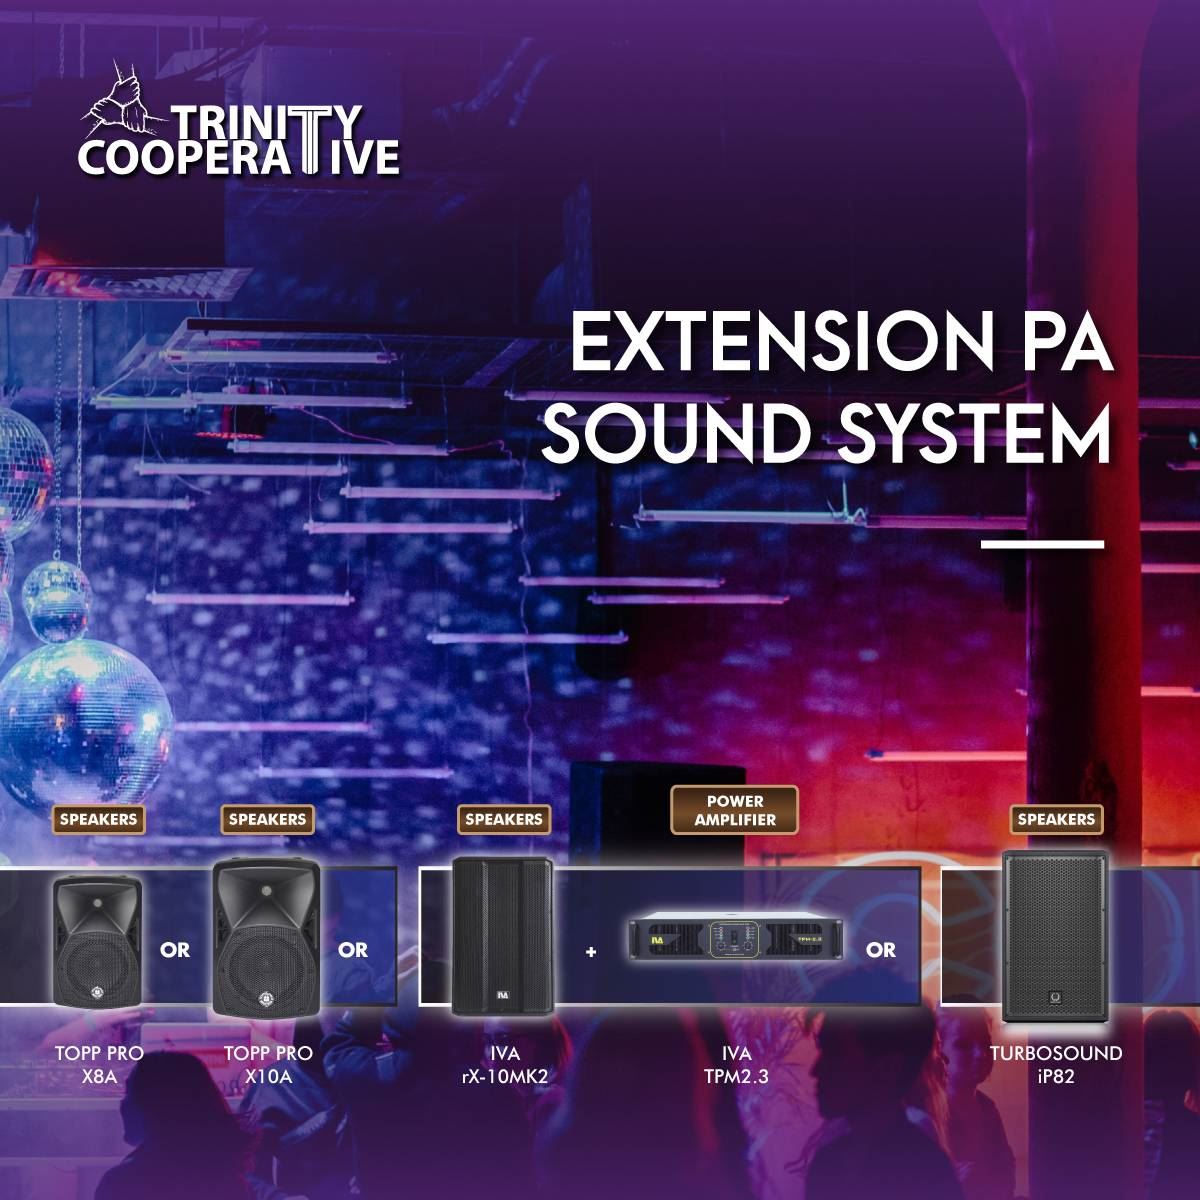 extension-pa-sound-system-for-bar-pub-club-bistro-topp-pro-x8a-x10a-or-iva-rx-10mk2